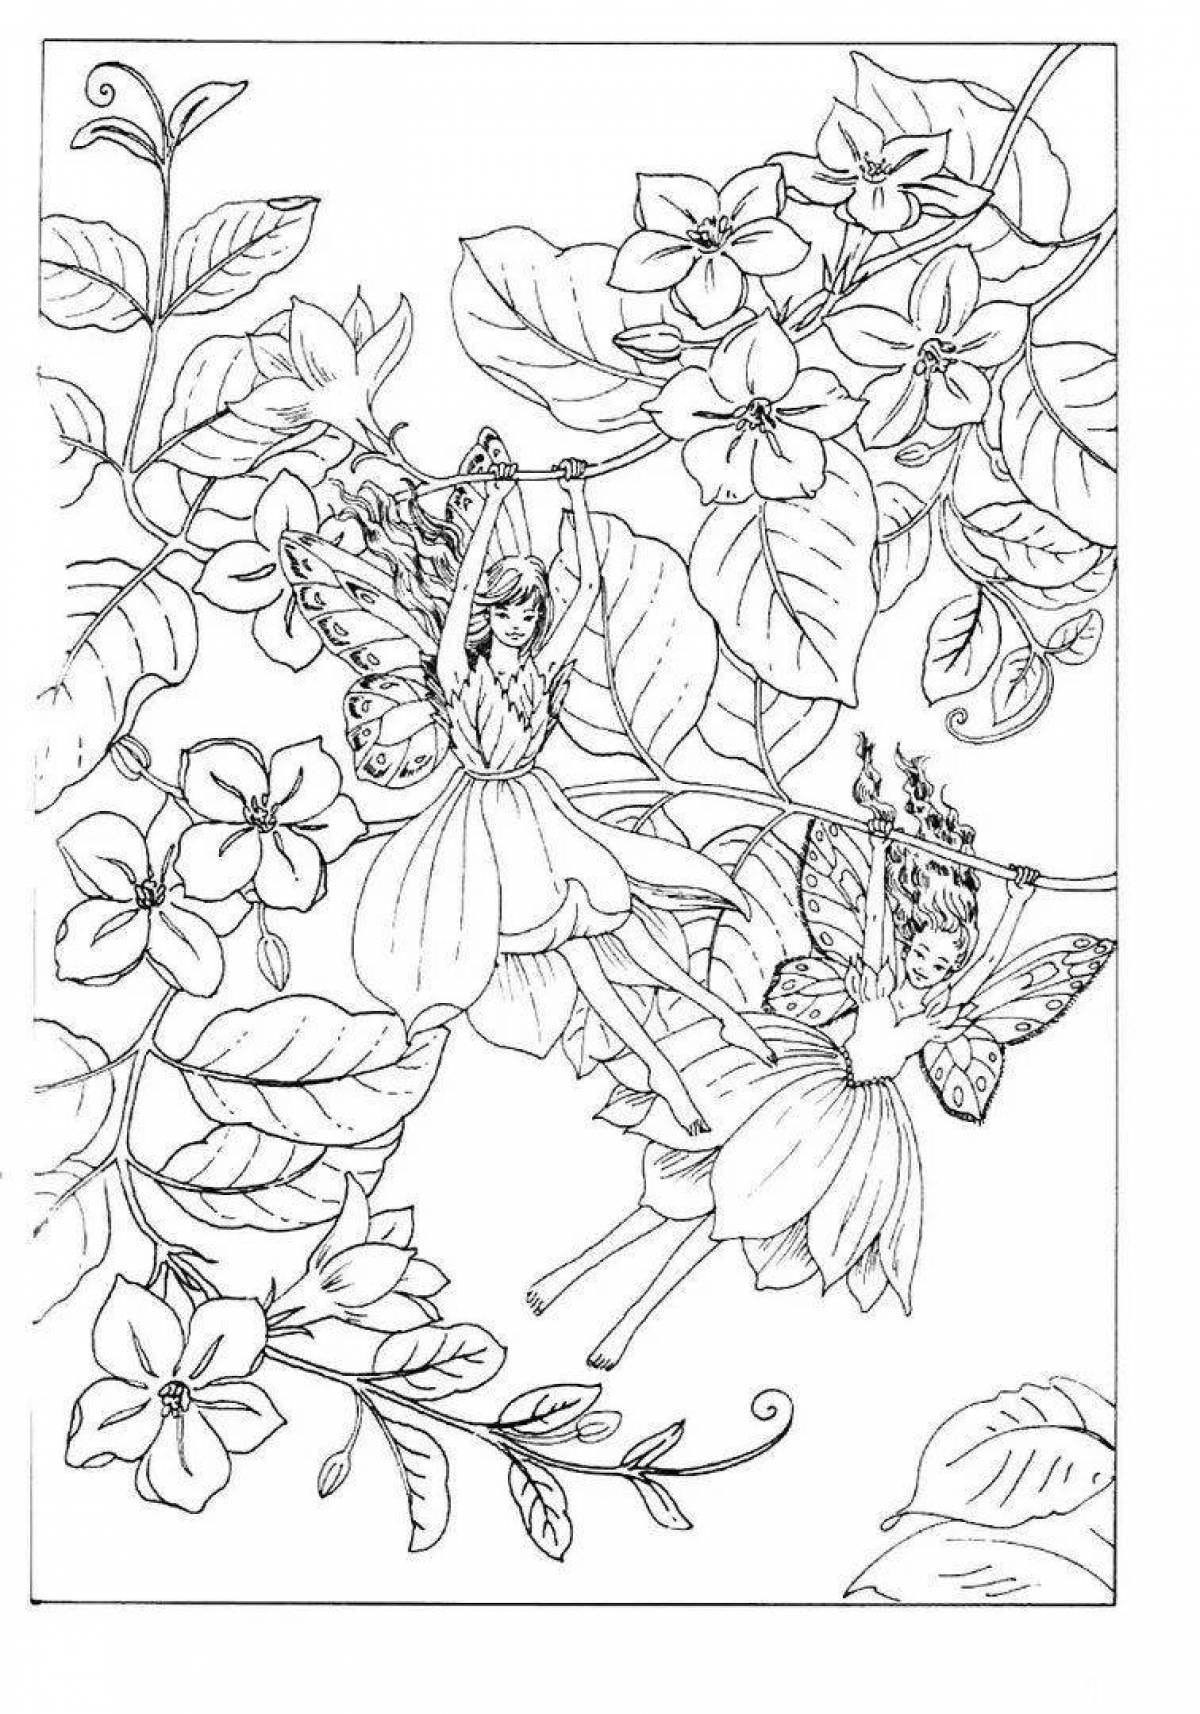 Impressive coloring pages for adults